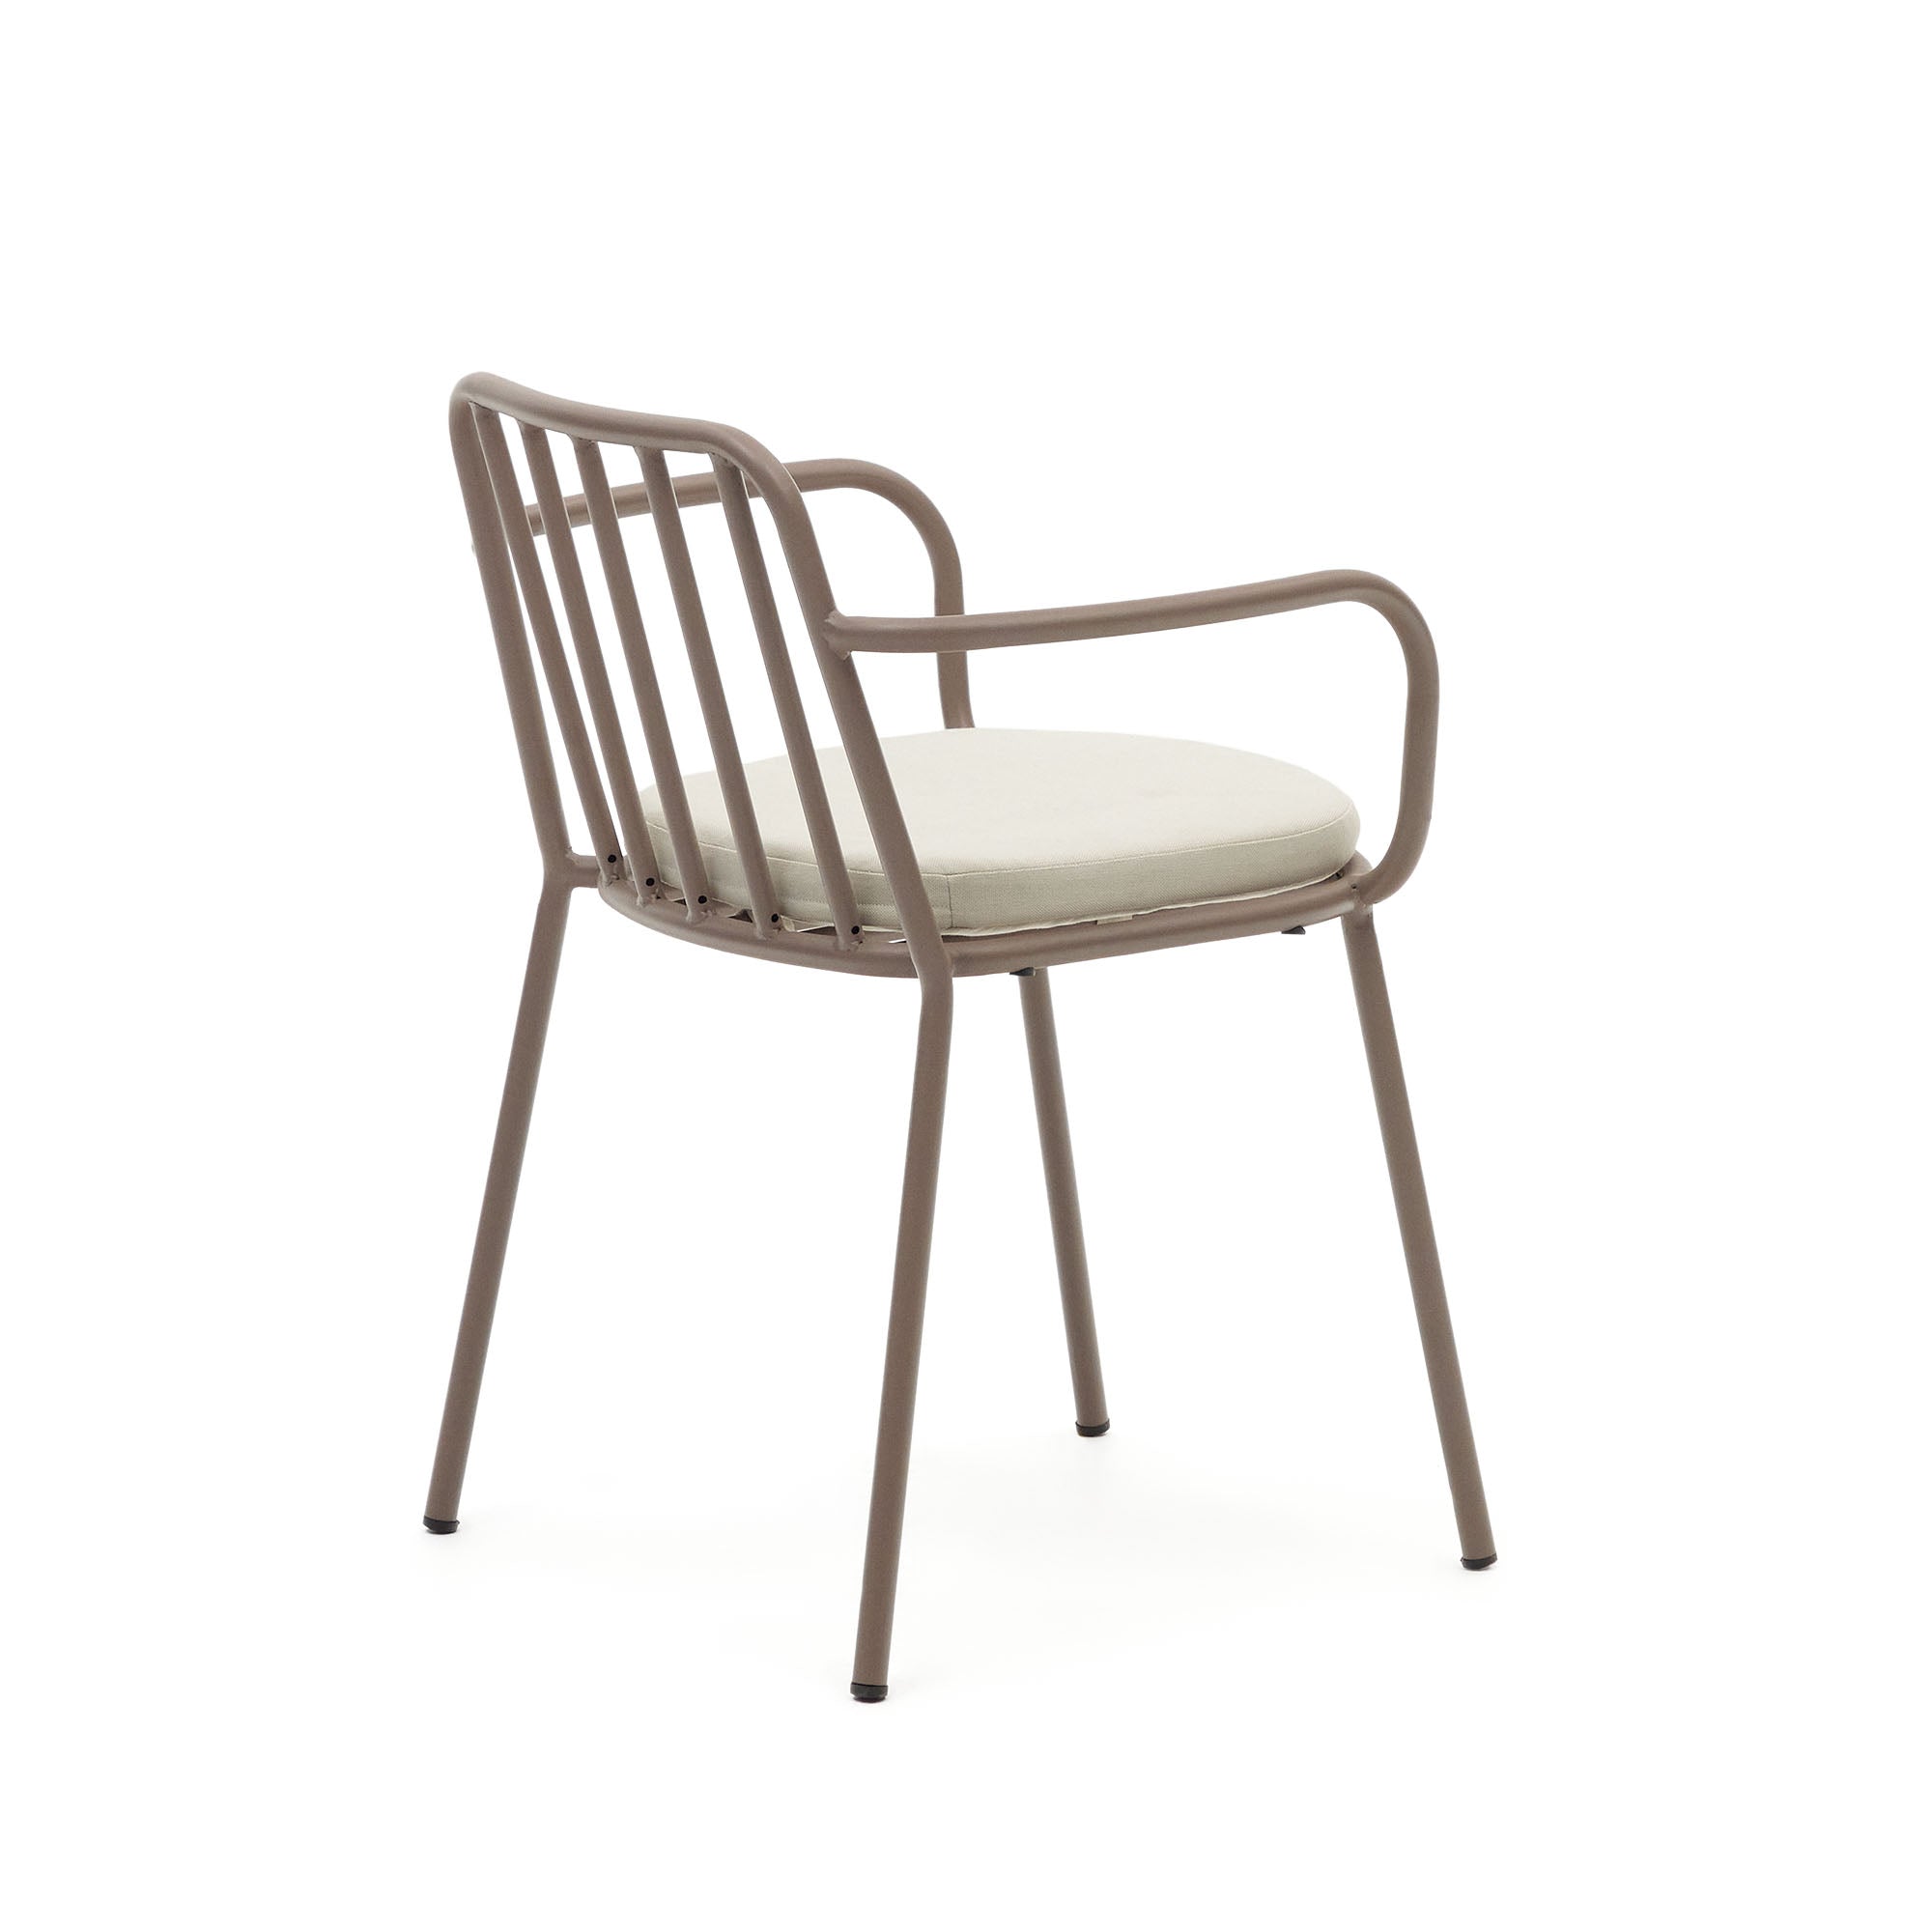 Bramant stackable steel chair with mauve finish